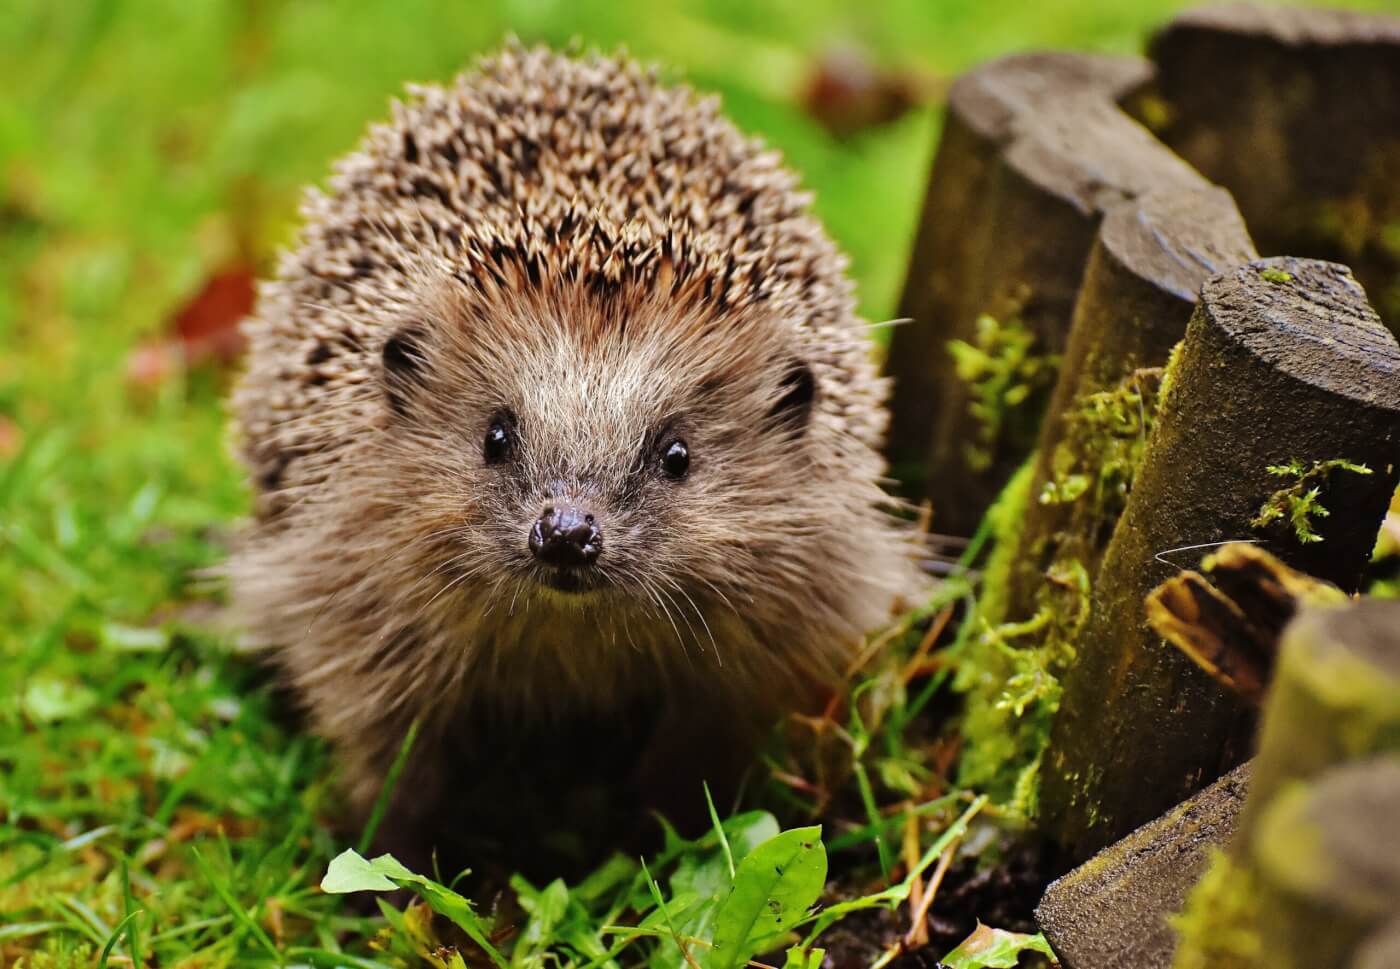 Hedgehogs Get the Green Light in NJ: The Latest on the Legalization